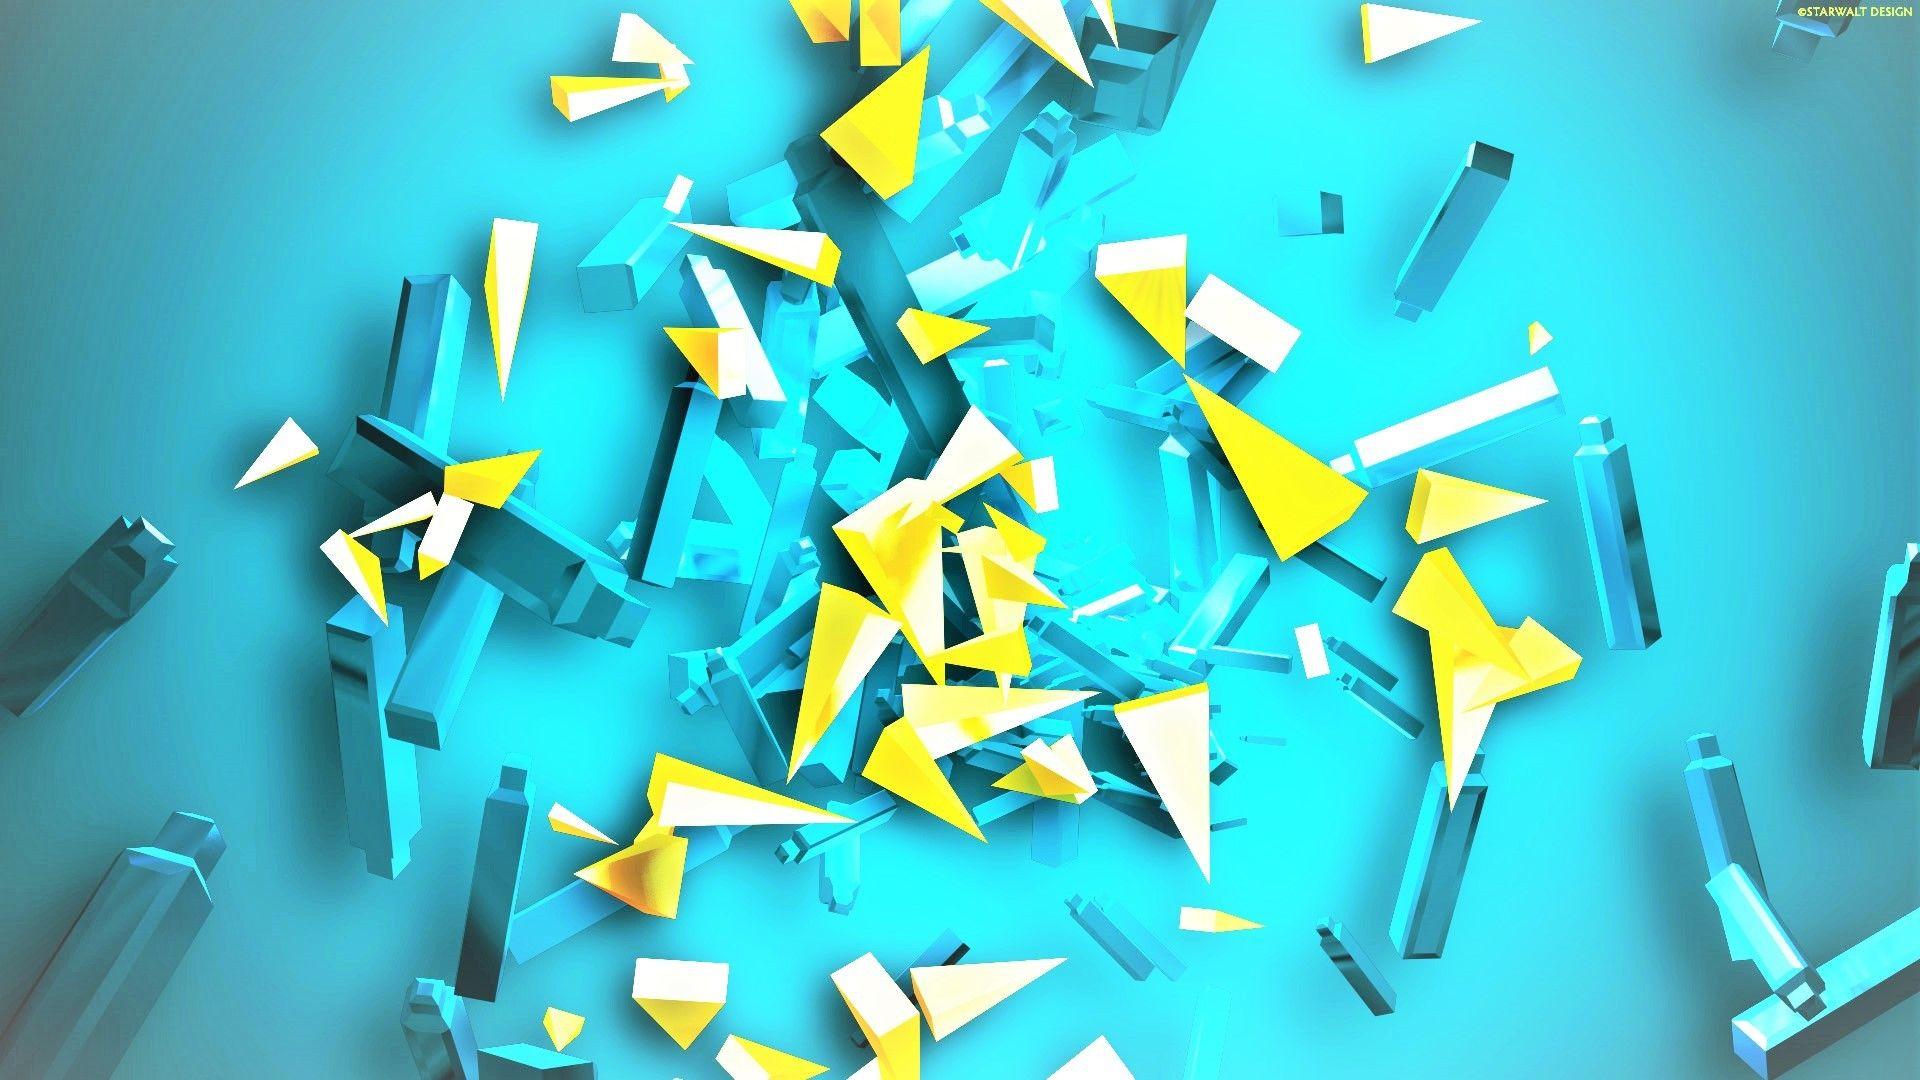 abstract blue yellow shards 3D colorful wallpaper and background